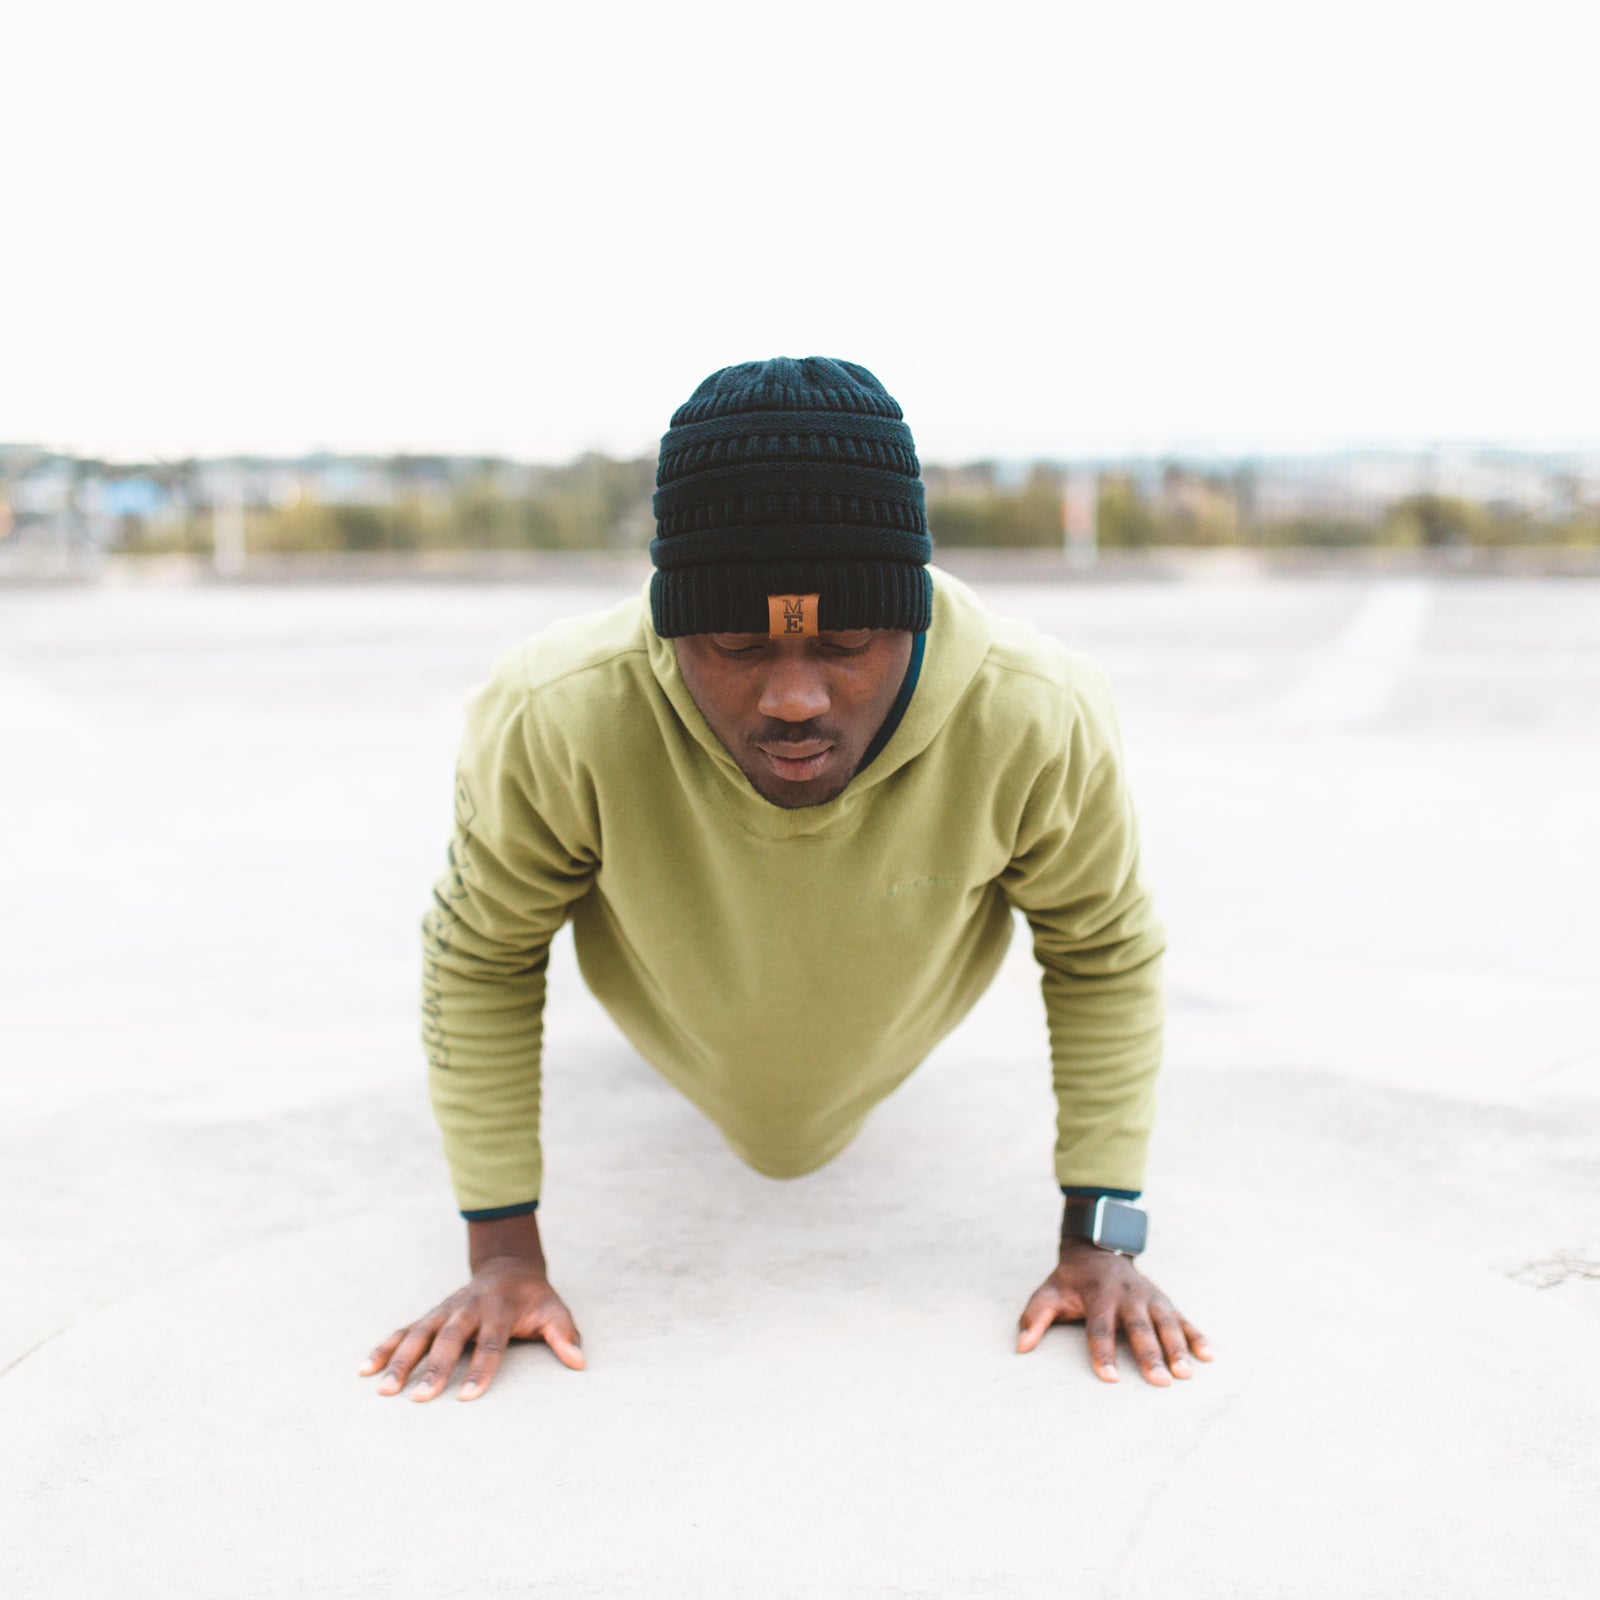 Should You Do Push-Ups and Sit-Ups Every Day?